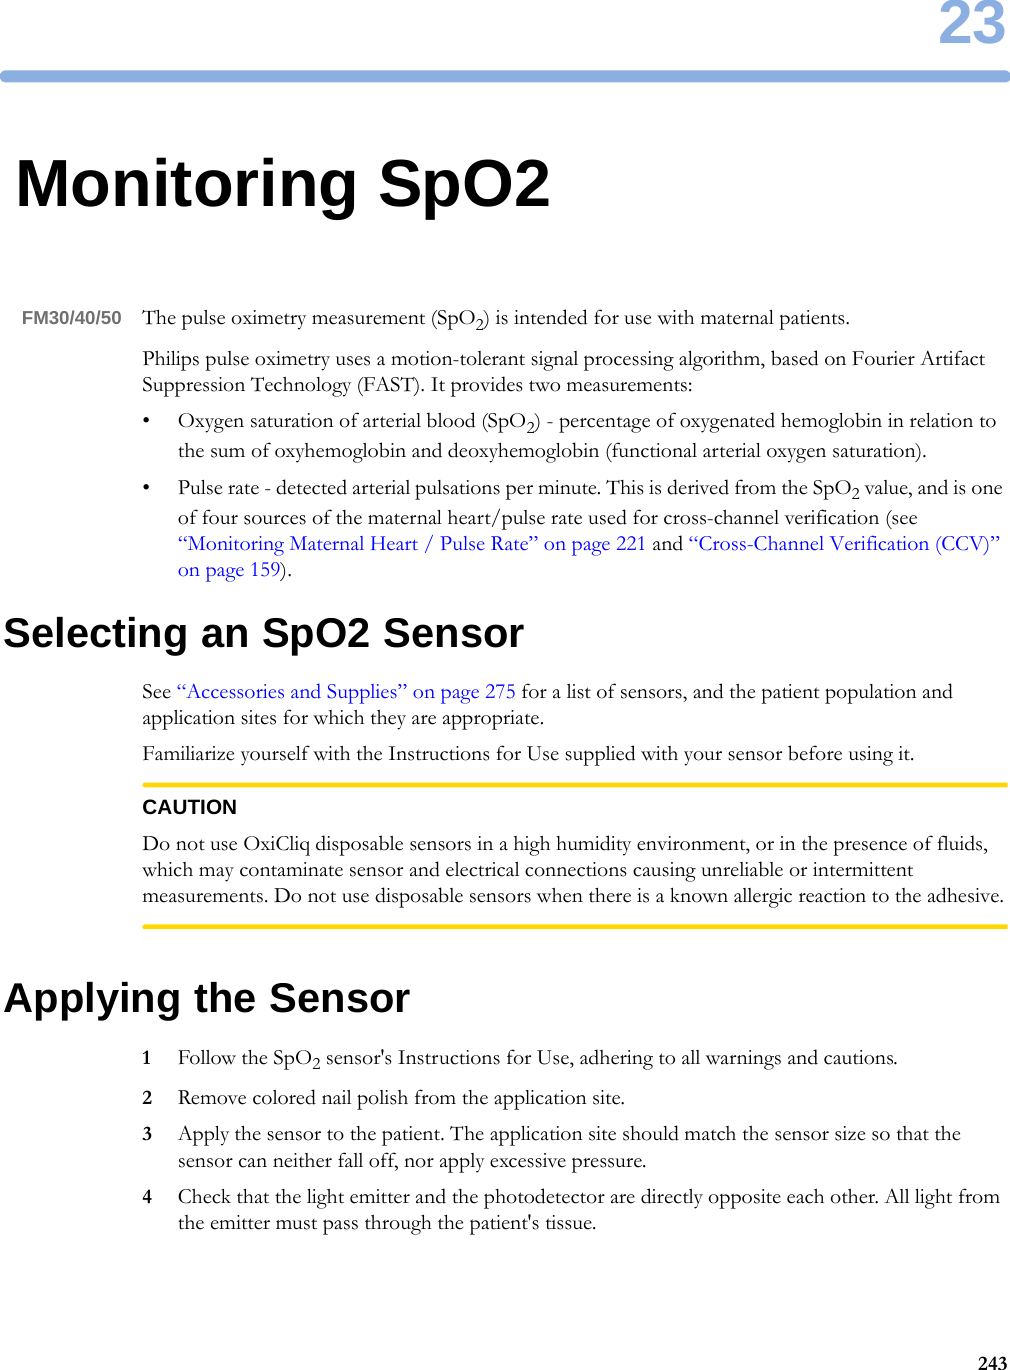 2324323Monitoring SpO2FM30/40/50 The pulse oximetry measurement (SpO2) is intended for use with maternal patients.Philips pulse oximetry uses a motion-tolerant signal processing algorithm, based on Fourier Artifact Suppression Technology (FAST). It provides two measurements:• Oxygen saturation of arterial blood (SpO2) - percentage of oxygenated hemoglobin in relation to the sum of oxyhemoglobin and deoxyhemoglobin (functional arterial oxygen saturation).• Pulse rate - detected arterial pulsations per minute. This is derived from the SpO2 value, and is one of four sources of the maternal heart/pulse rate used for cross-channel verification (see “Monitoring Maternal Heart / Pulse Rate” on page 221 and “Cross-Channel Verification (CCV)” on page 159).Selecting an SpO2 SensorSee “Accessories and Supplies” on page 275 for a list of sensors, and the patient population and application sites for which they are appropriate.Familiarize yourself with the Instructions for Use supplied with your sensor before using it.CAUTIONDo not use OxiCliq disposable sensors in a high humidity environment, or in the presence of fluids, which may contaminate sensor and electrical connections causing unreliable or intermittent measurements. Do not use disposable sensors when there is a known allergic reaction to the adhesive.Applying the Sensor1Follow the SpO2 sensor&apos;s Instructions for Use, adhering to all warnings and cautions.2Remove colored nail polish from the application site.3Apply the sensor to the patient. The application site should match the sensor size so that the sensor can neither fall off, nor apply excessive pressure.4Check that the light emitter and the photodetector are directly opposite each other. All light from the emitter must pass through the patient&apos;s tissue.